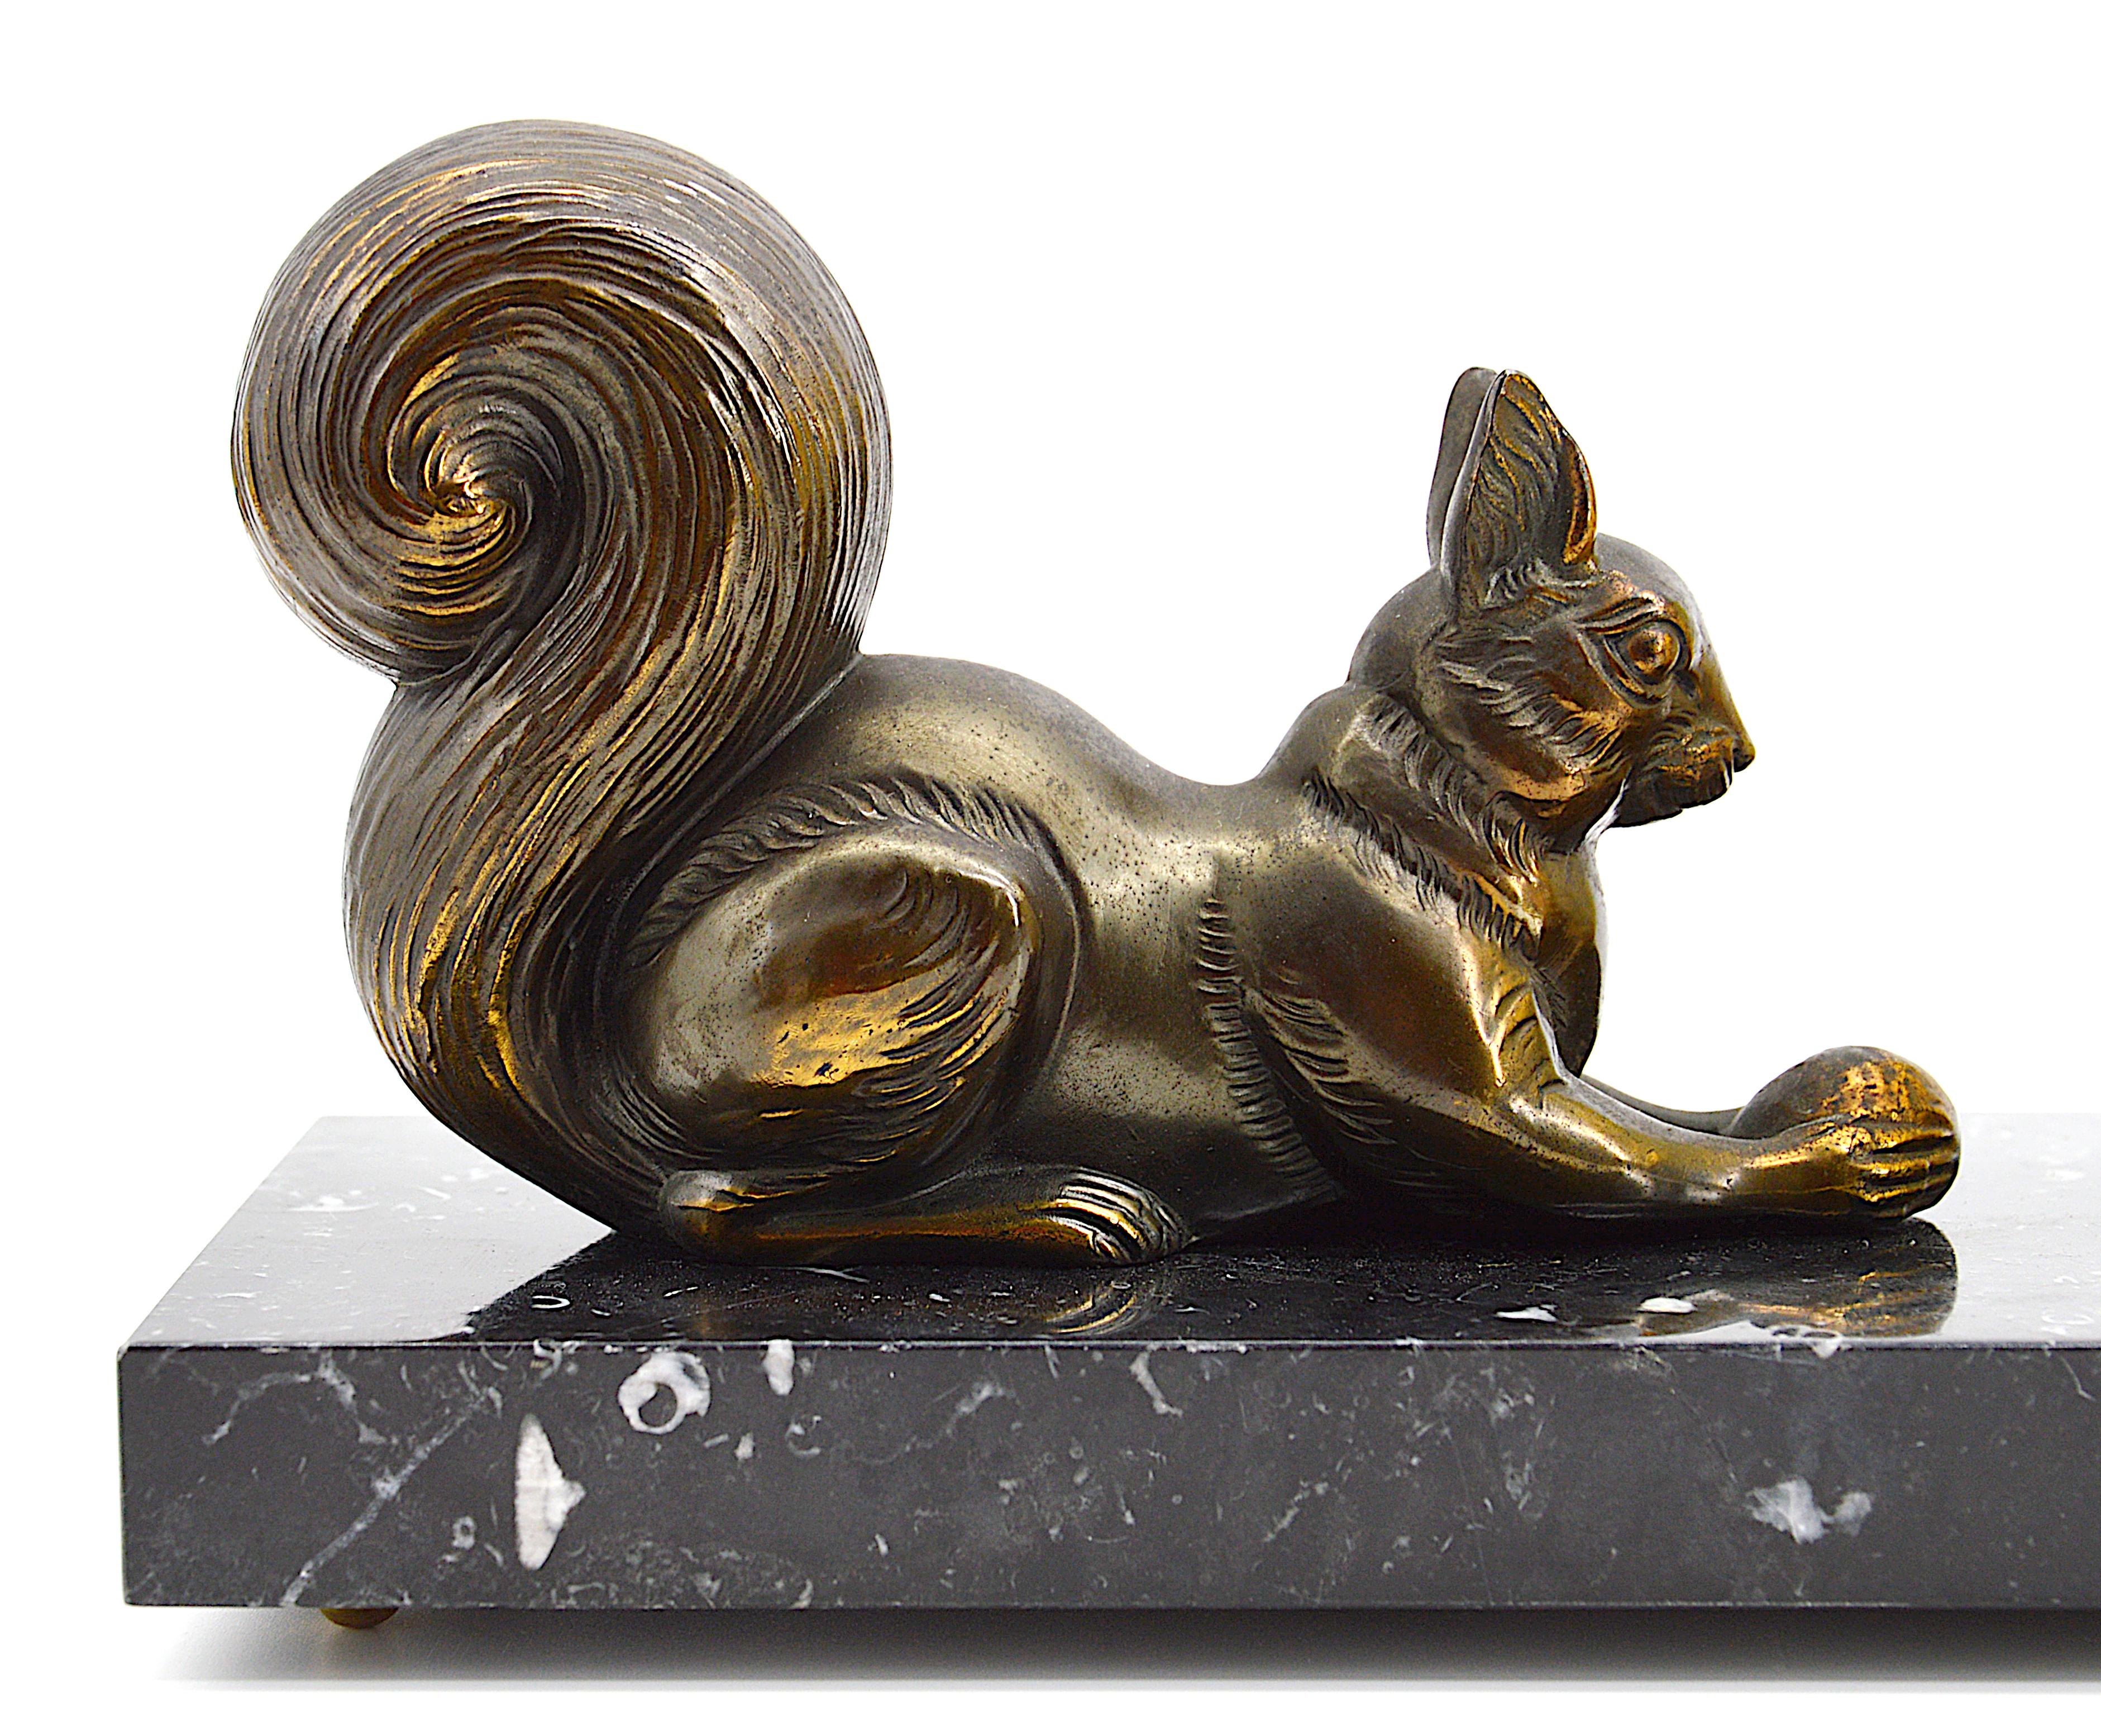 French Art Deco table lamp / night-light, 1930s. Spelter squirrel eating a pine cone. Marble base. Measures: Height 6.1